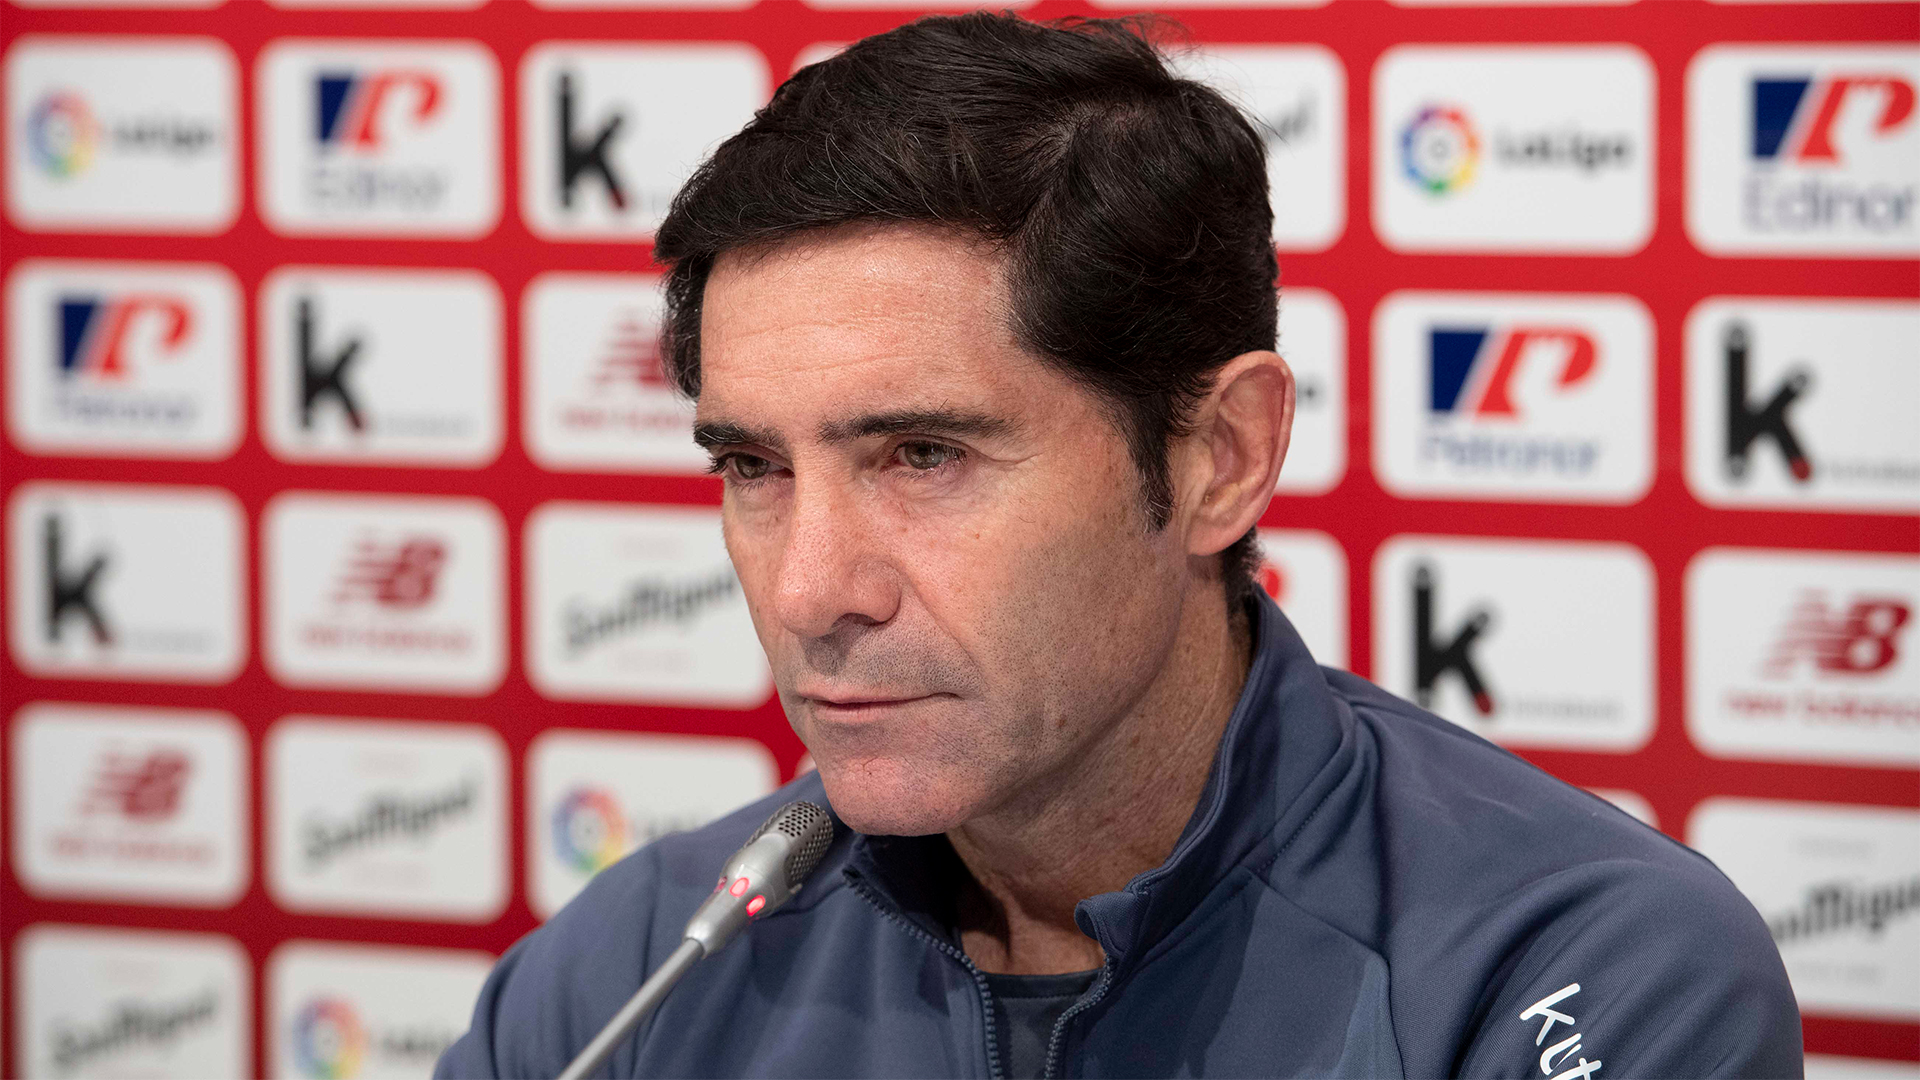 Marcelino: “We’re better than the results show”